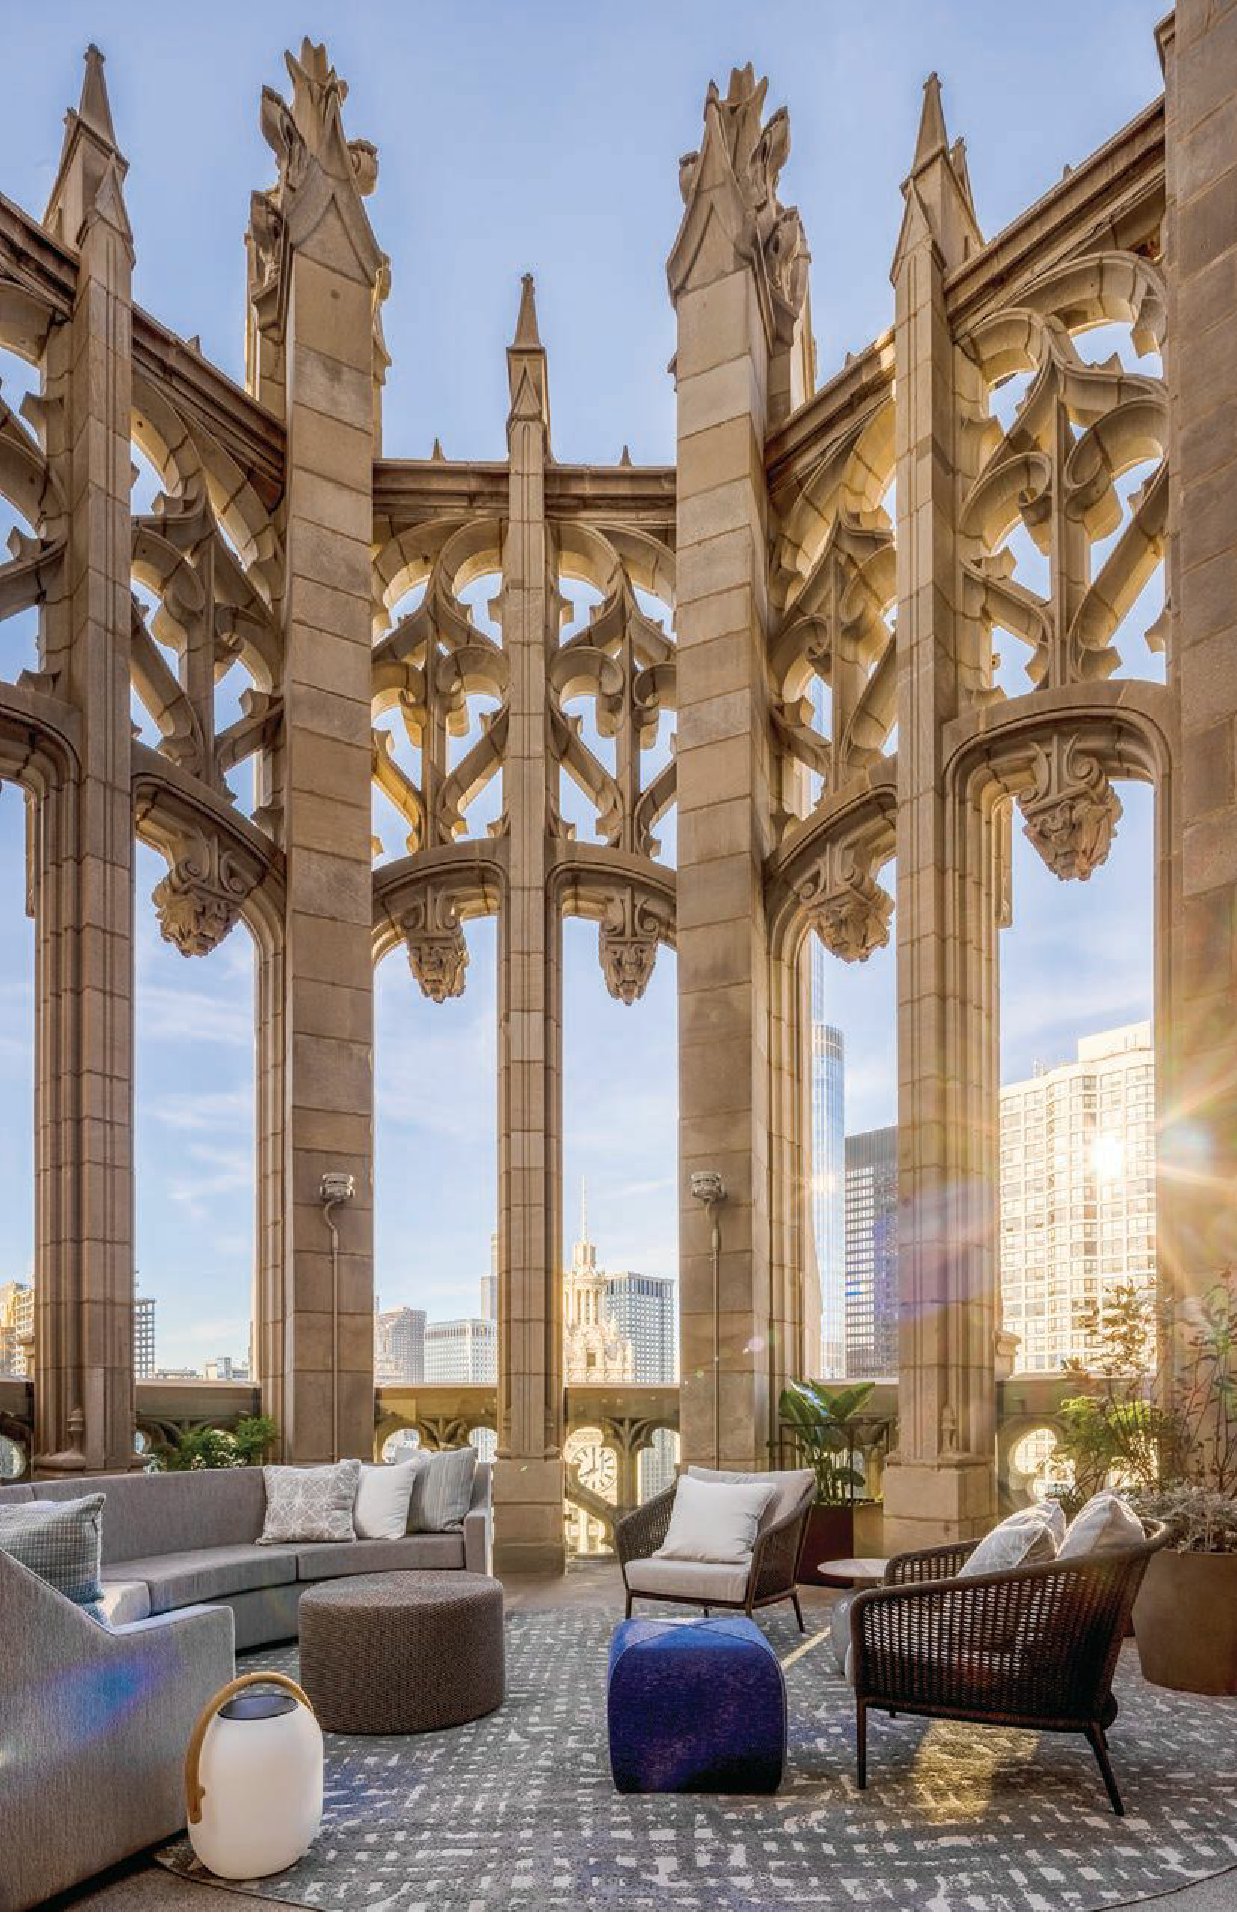 exclusive to residents, the 25th-floor crown beckons with inviting seating
areas, outdoor terrace grilling, a fire pit and stunning city views. PHOTO COURTESY OF TRIBUNE TOWER RESIDENCES